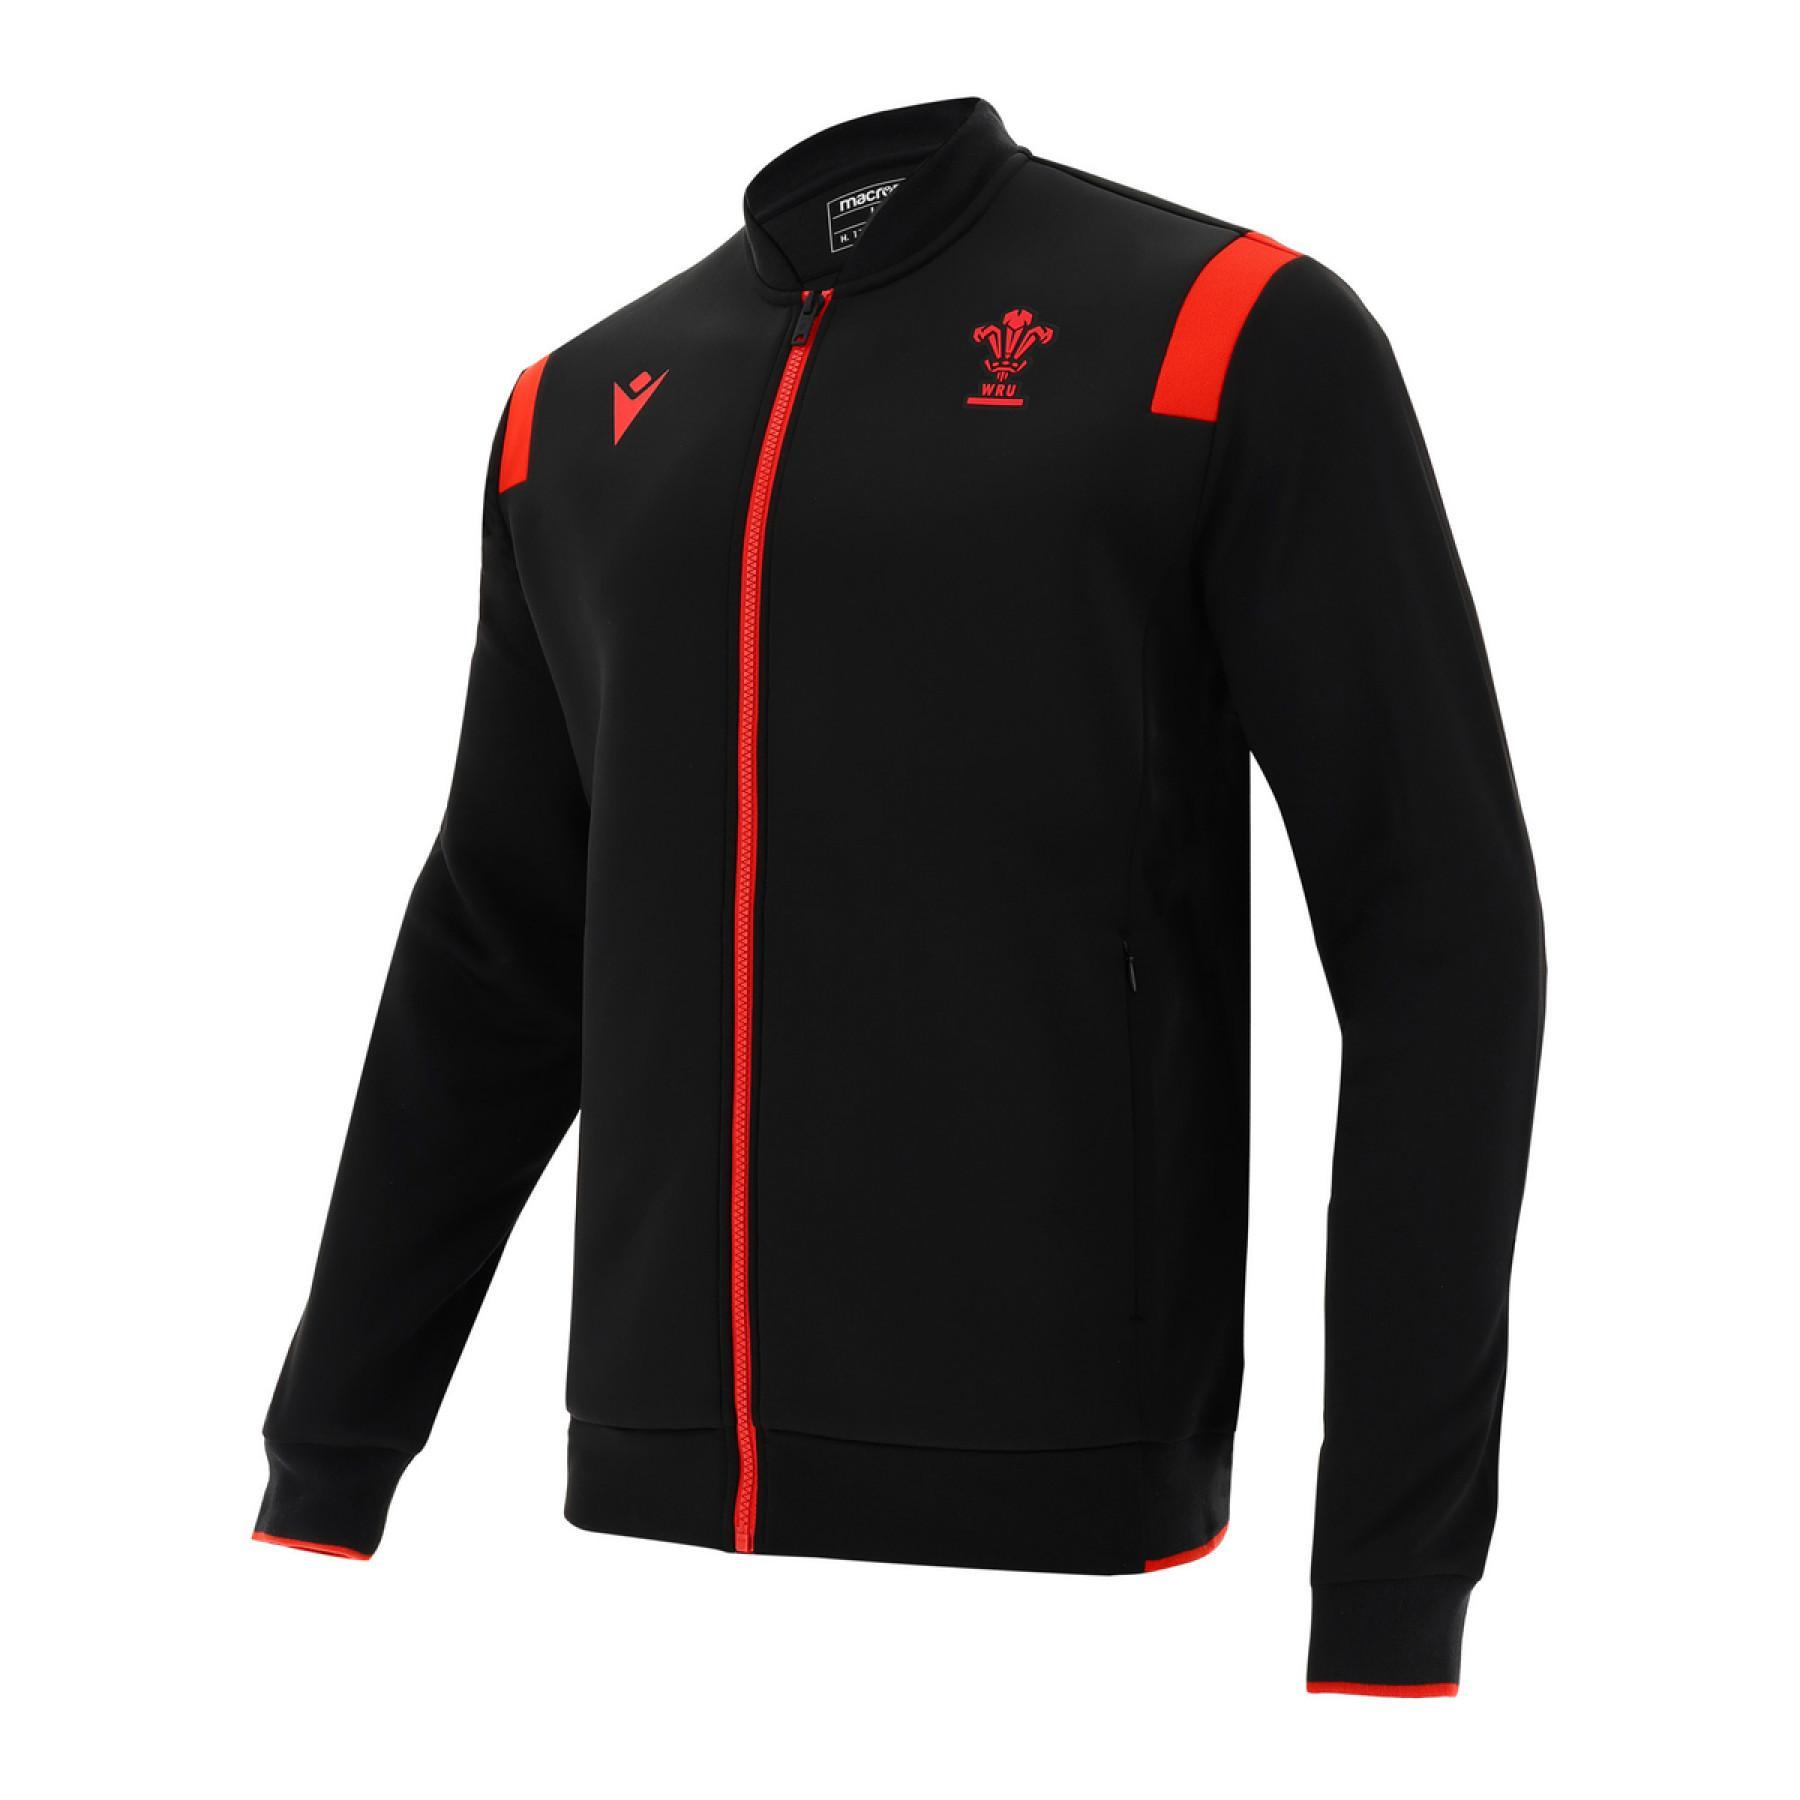 Outdoor jacket Pays de Galles rugby 2020/21